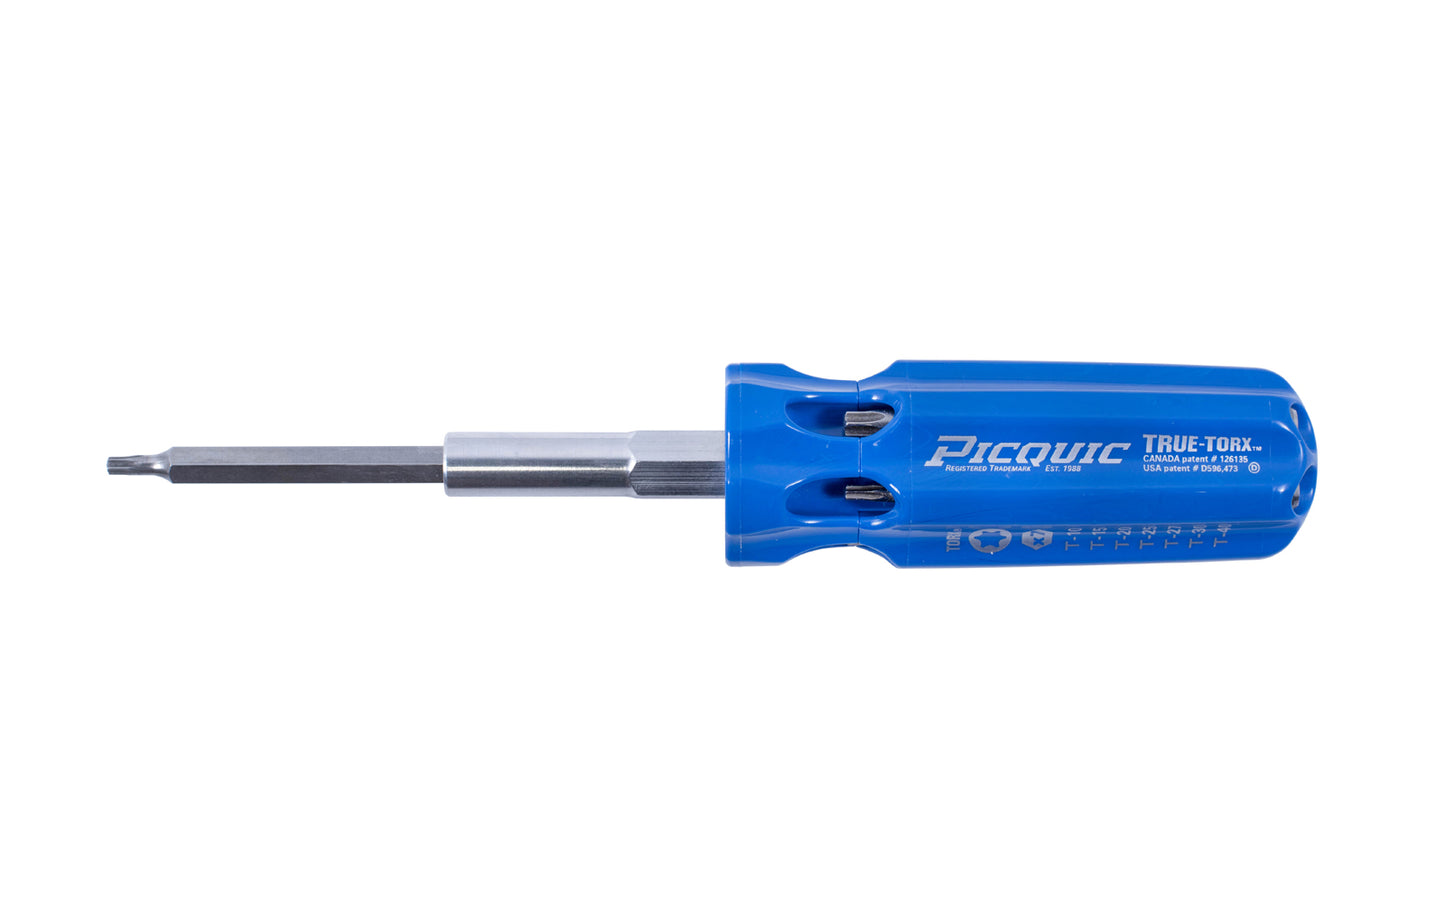 Picquic Model 88155 - "True Torx" with a solid handle for comfort & torque, & has no moving parts. Bits included: 10, 15, 20, 25, 27, 30, 40 Torx bits. Picquic TrueTorx Multi-Bit screwdriver with bit storage in handle. 57369881559. magnetic rare earth magnet holds the working bit in shank. Precision-machined power bits